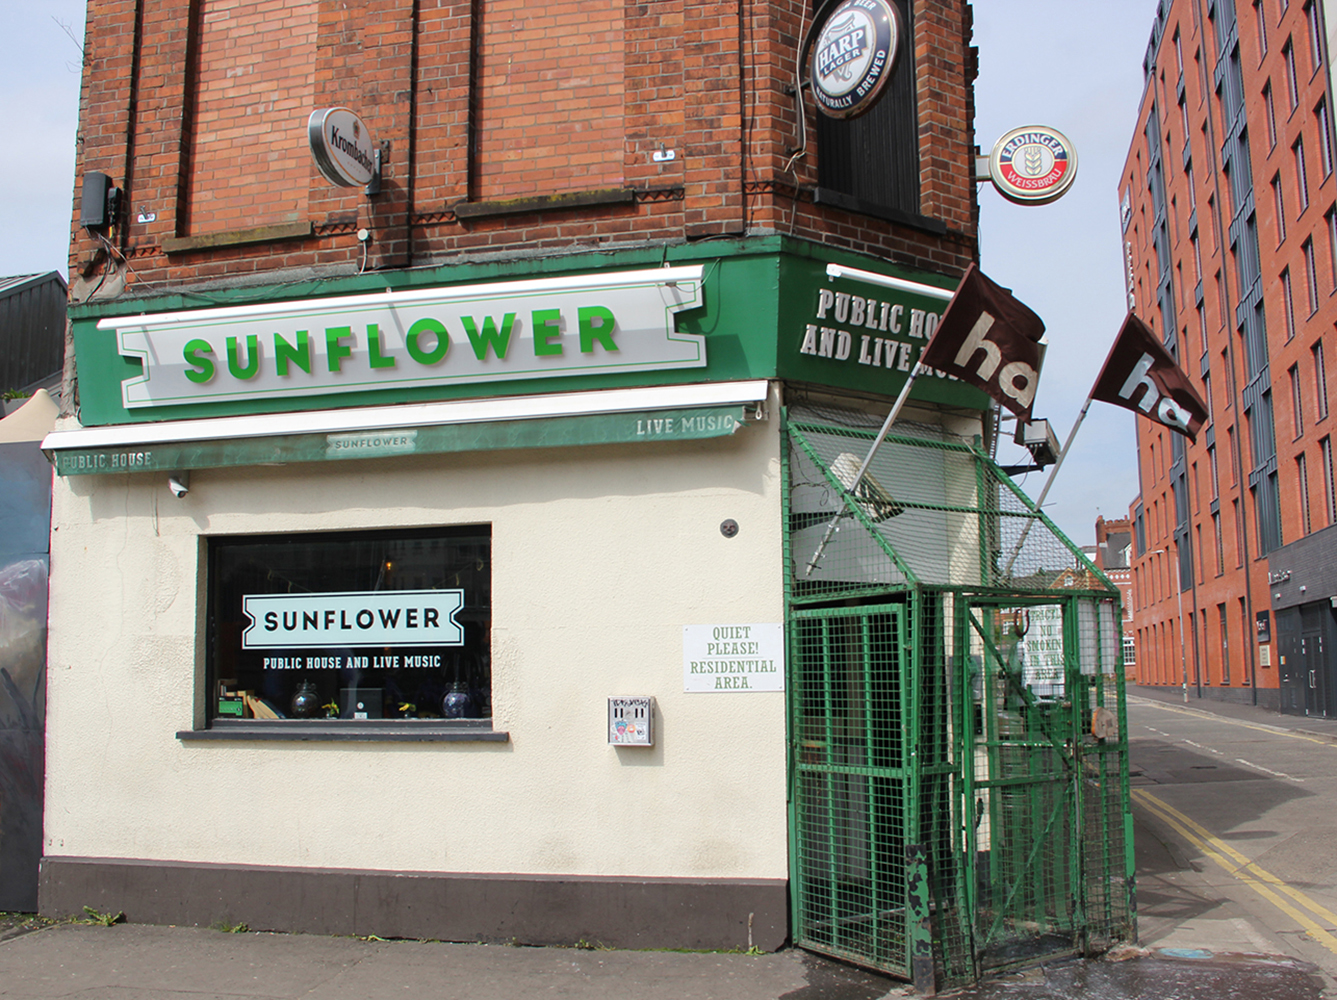 Image of two 'ha ha' flags on the cage entrance to the Sunflower Bar - clearly displaying 'ha ha'.